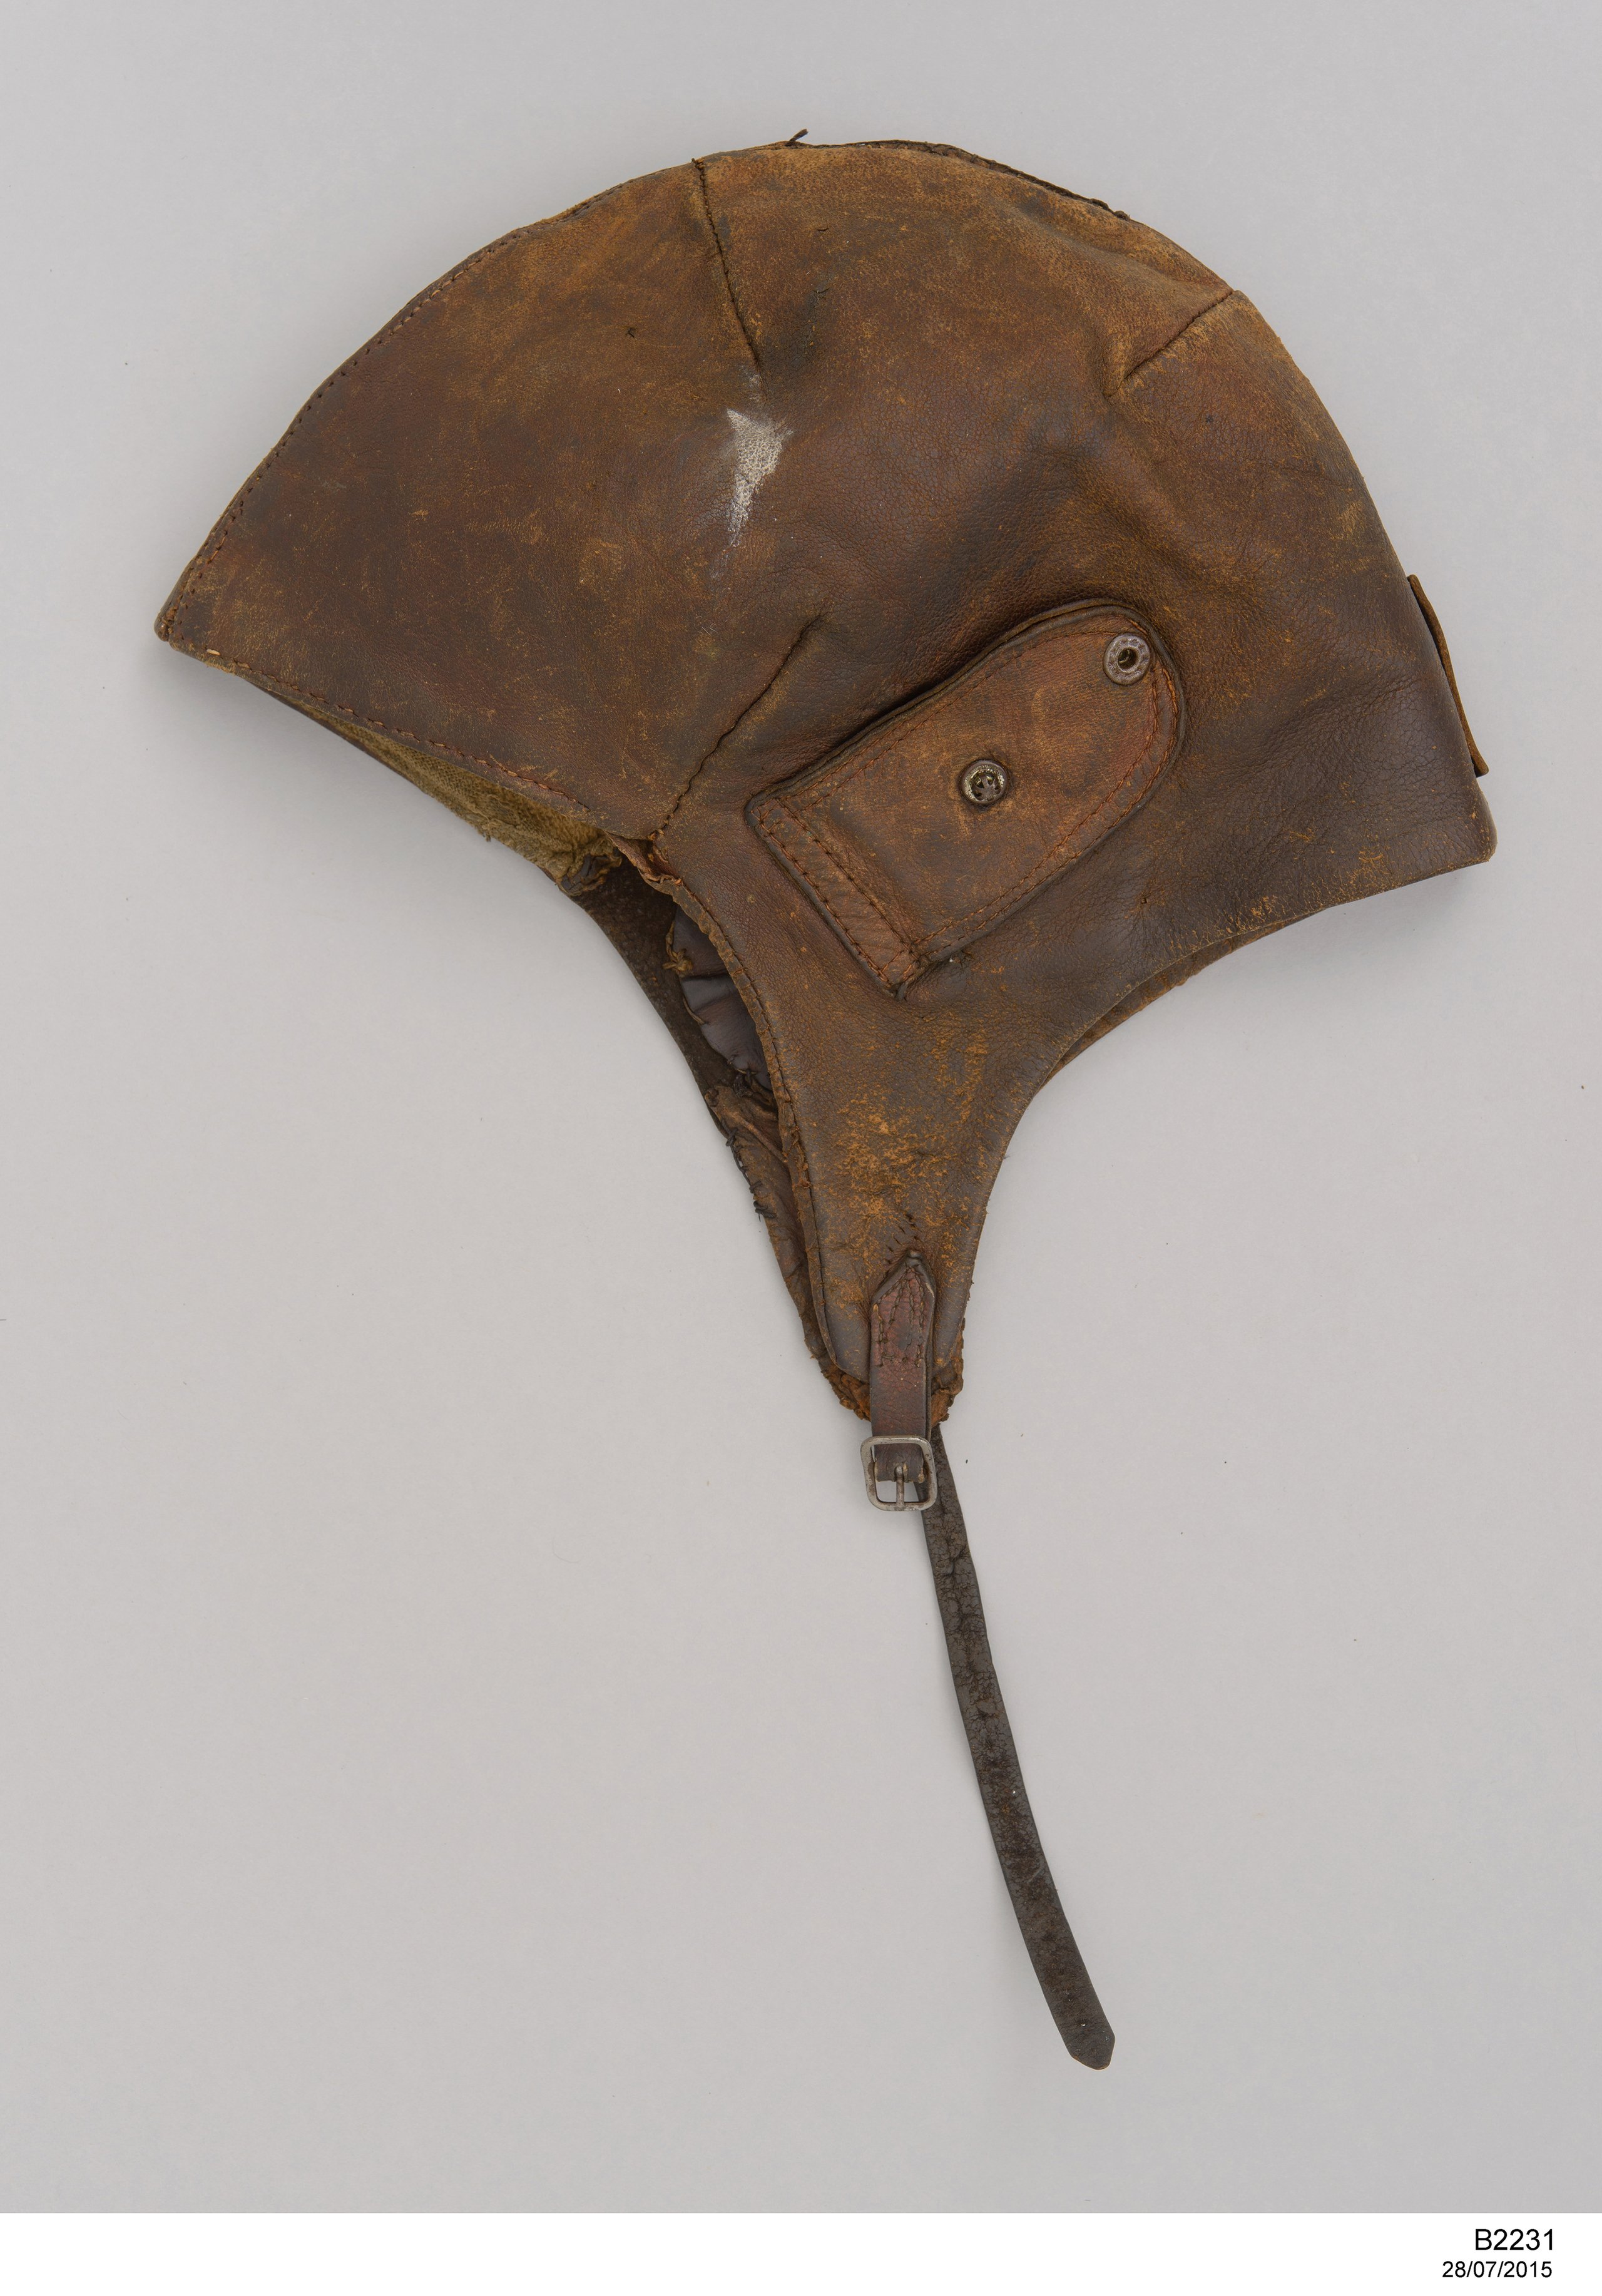 Flying helmet worn by Charles Kingsford Smith with fuel pipes from the 'Southern Cross'